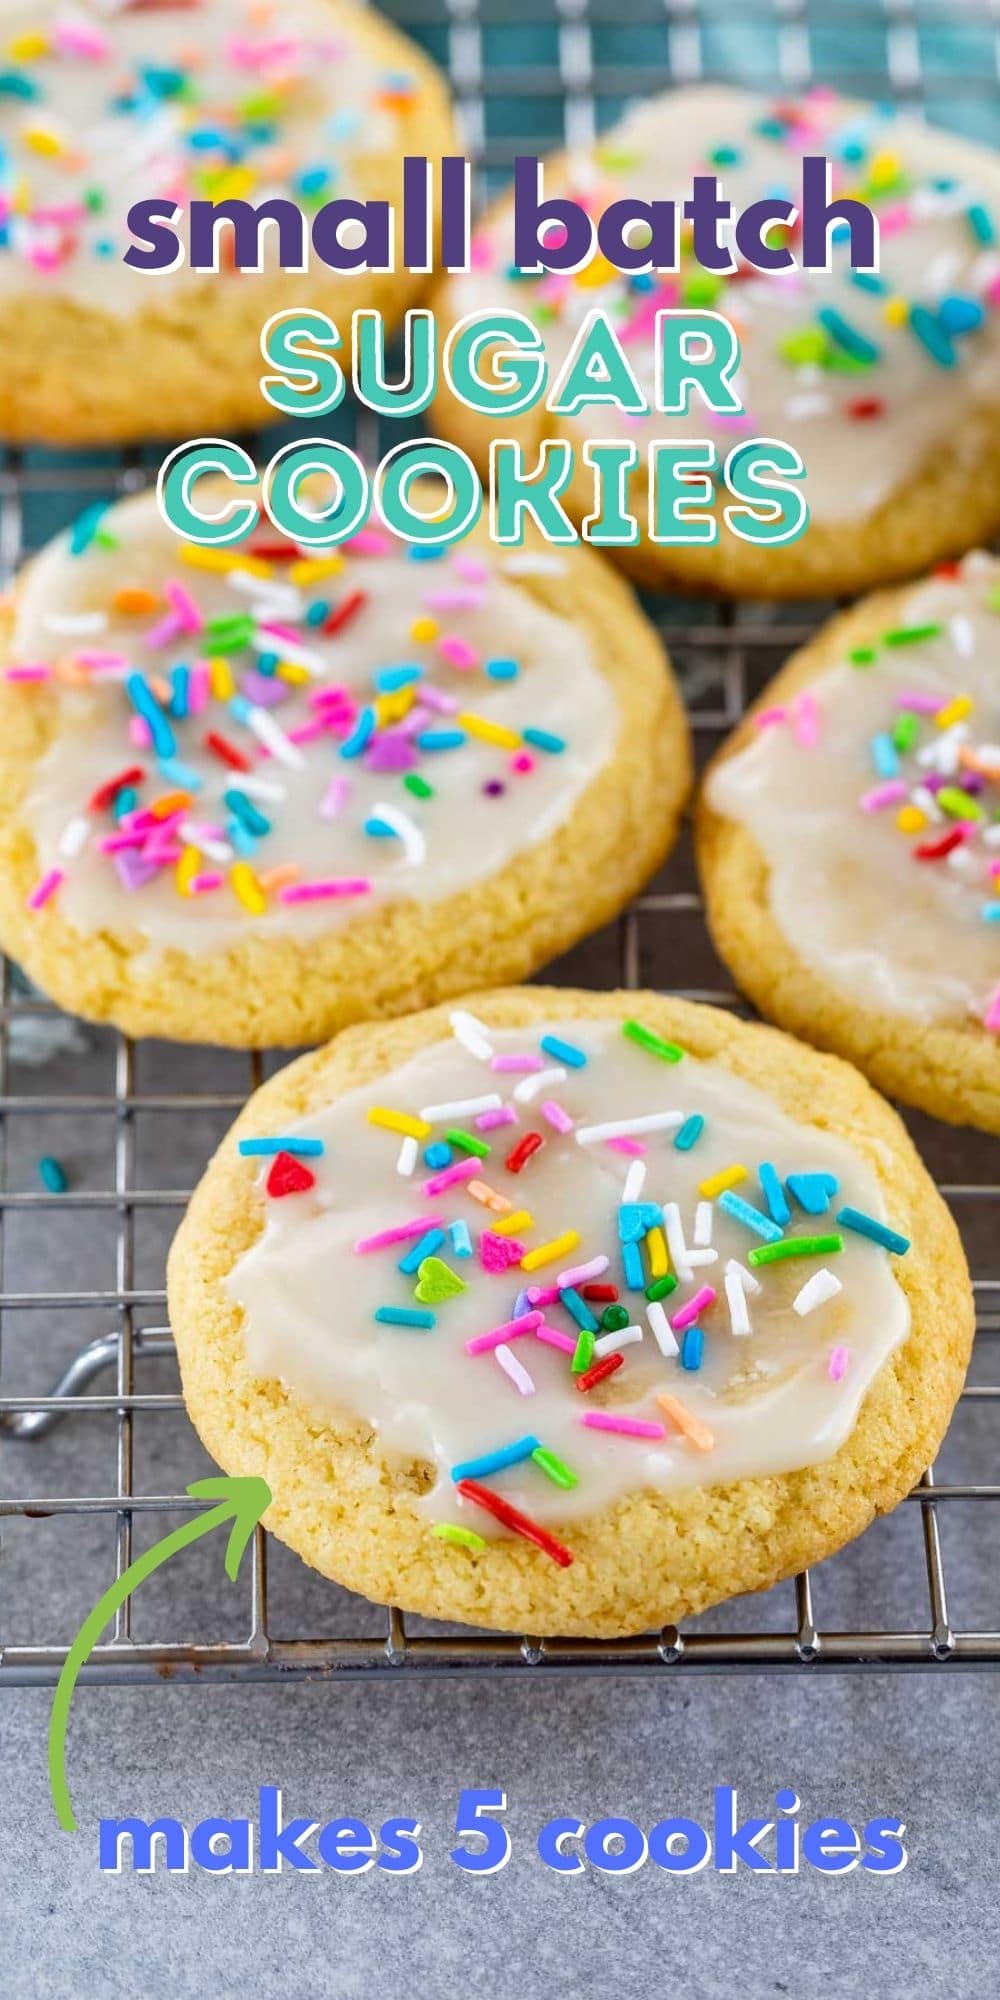 Five sugar cookies with icing and sprinkles on a wire cooling rack with recipe title on top of image